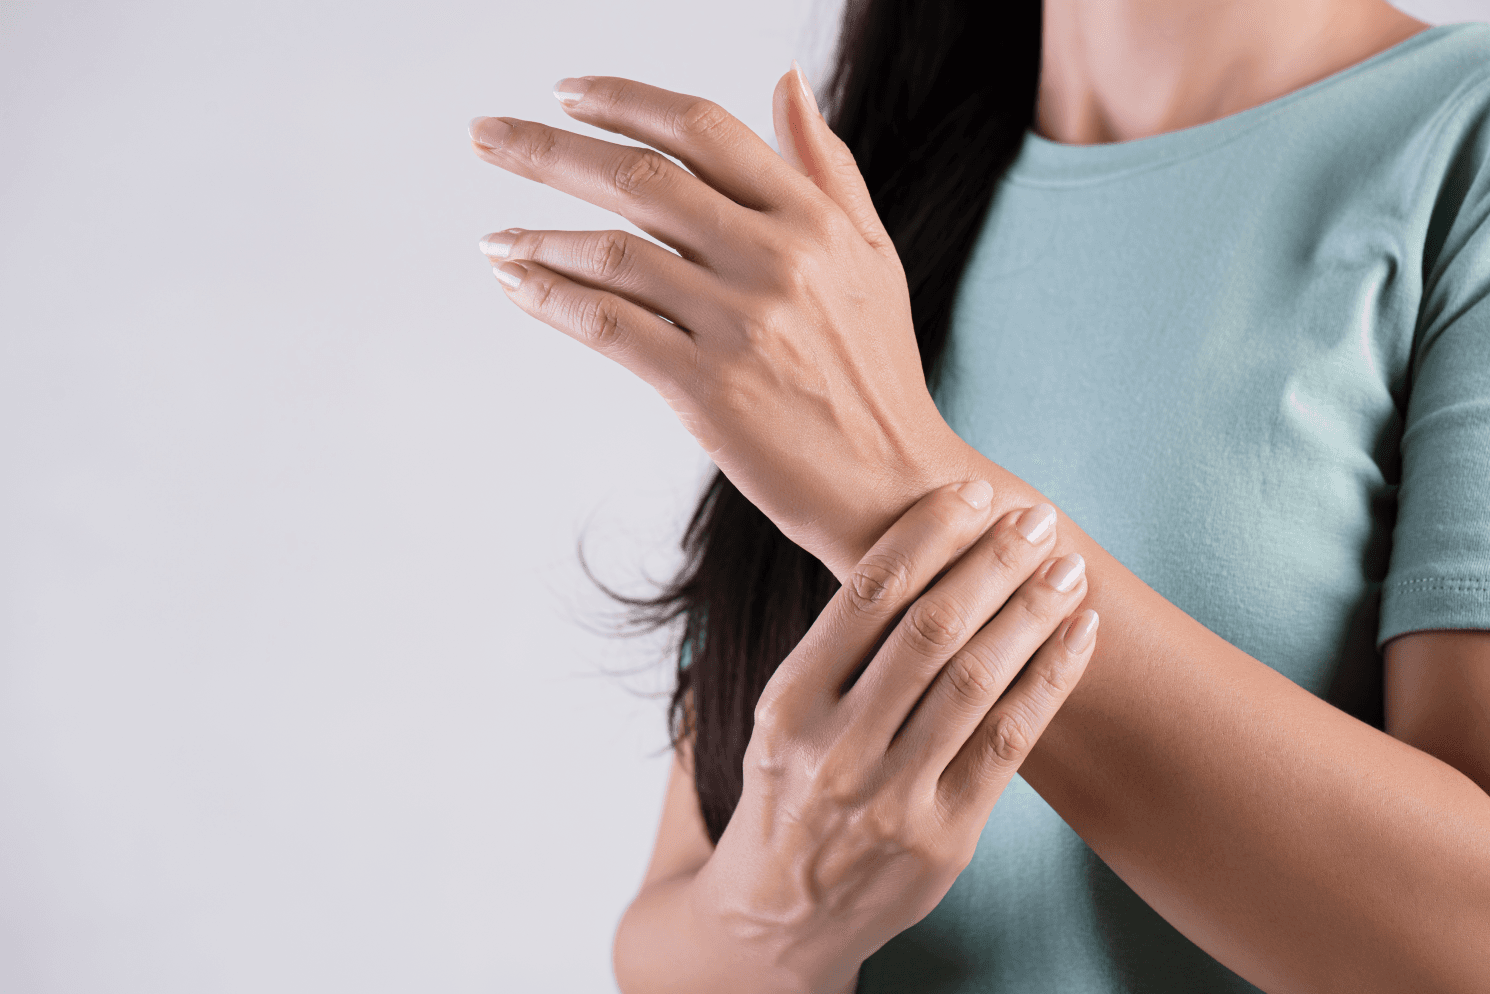 Carpal Tunnel Syndrome: Symptoms, Causes, and Treatment